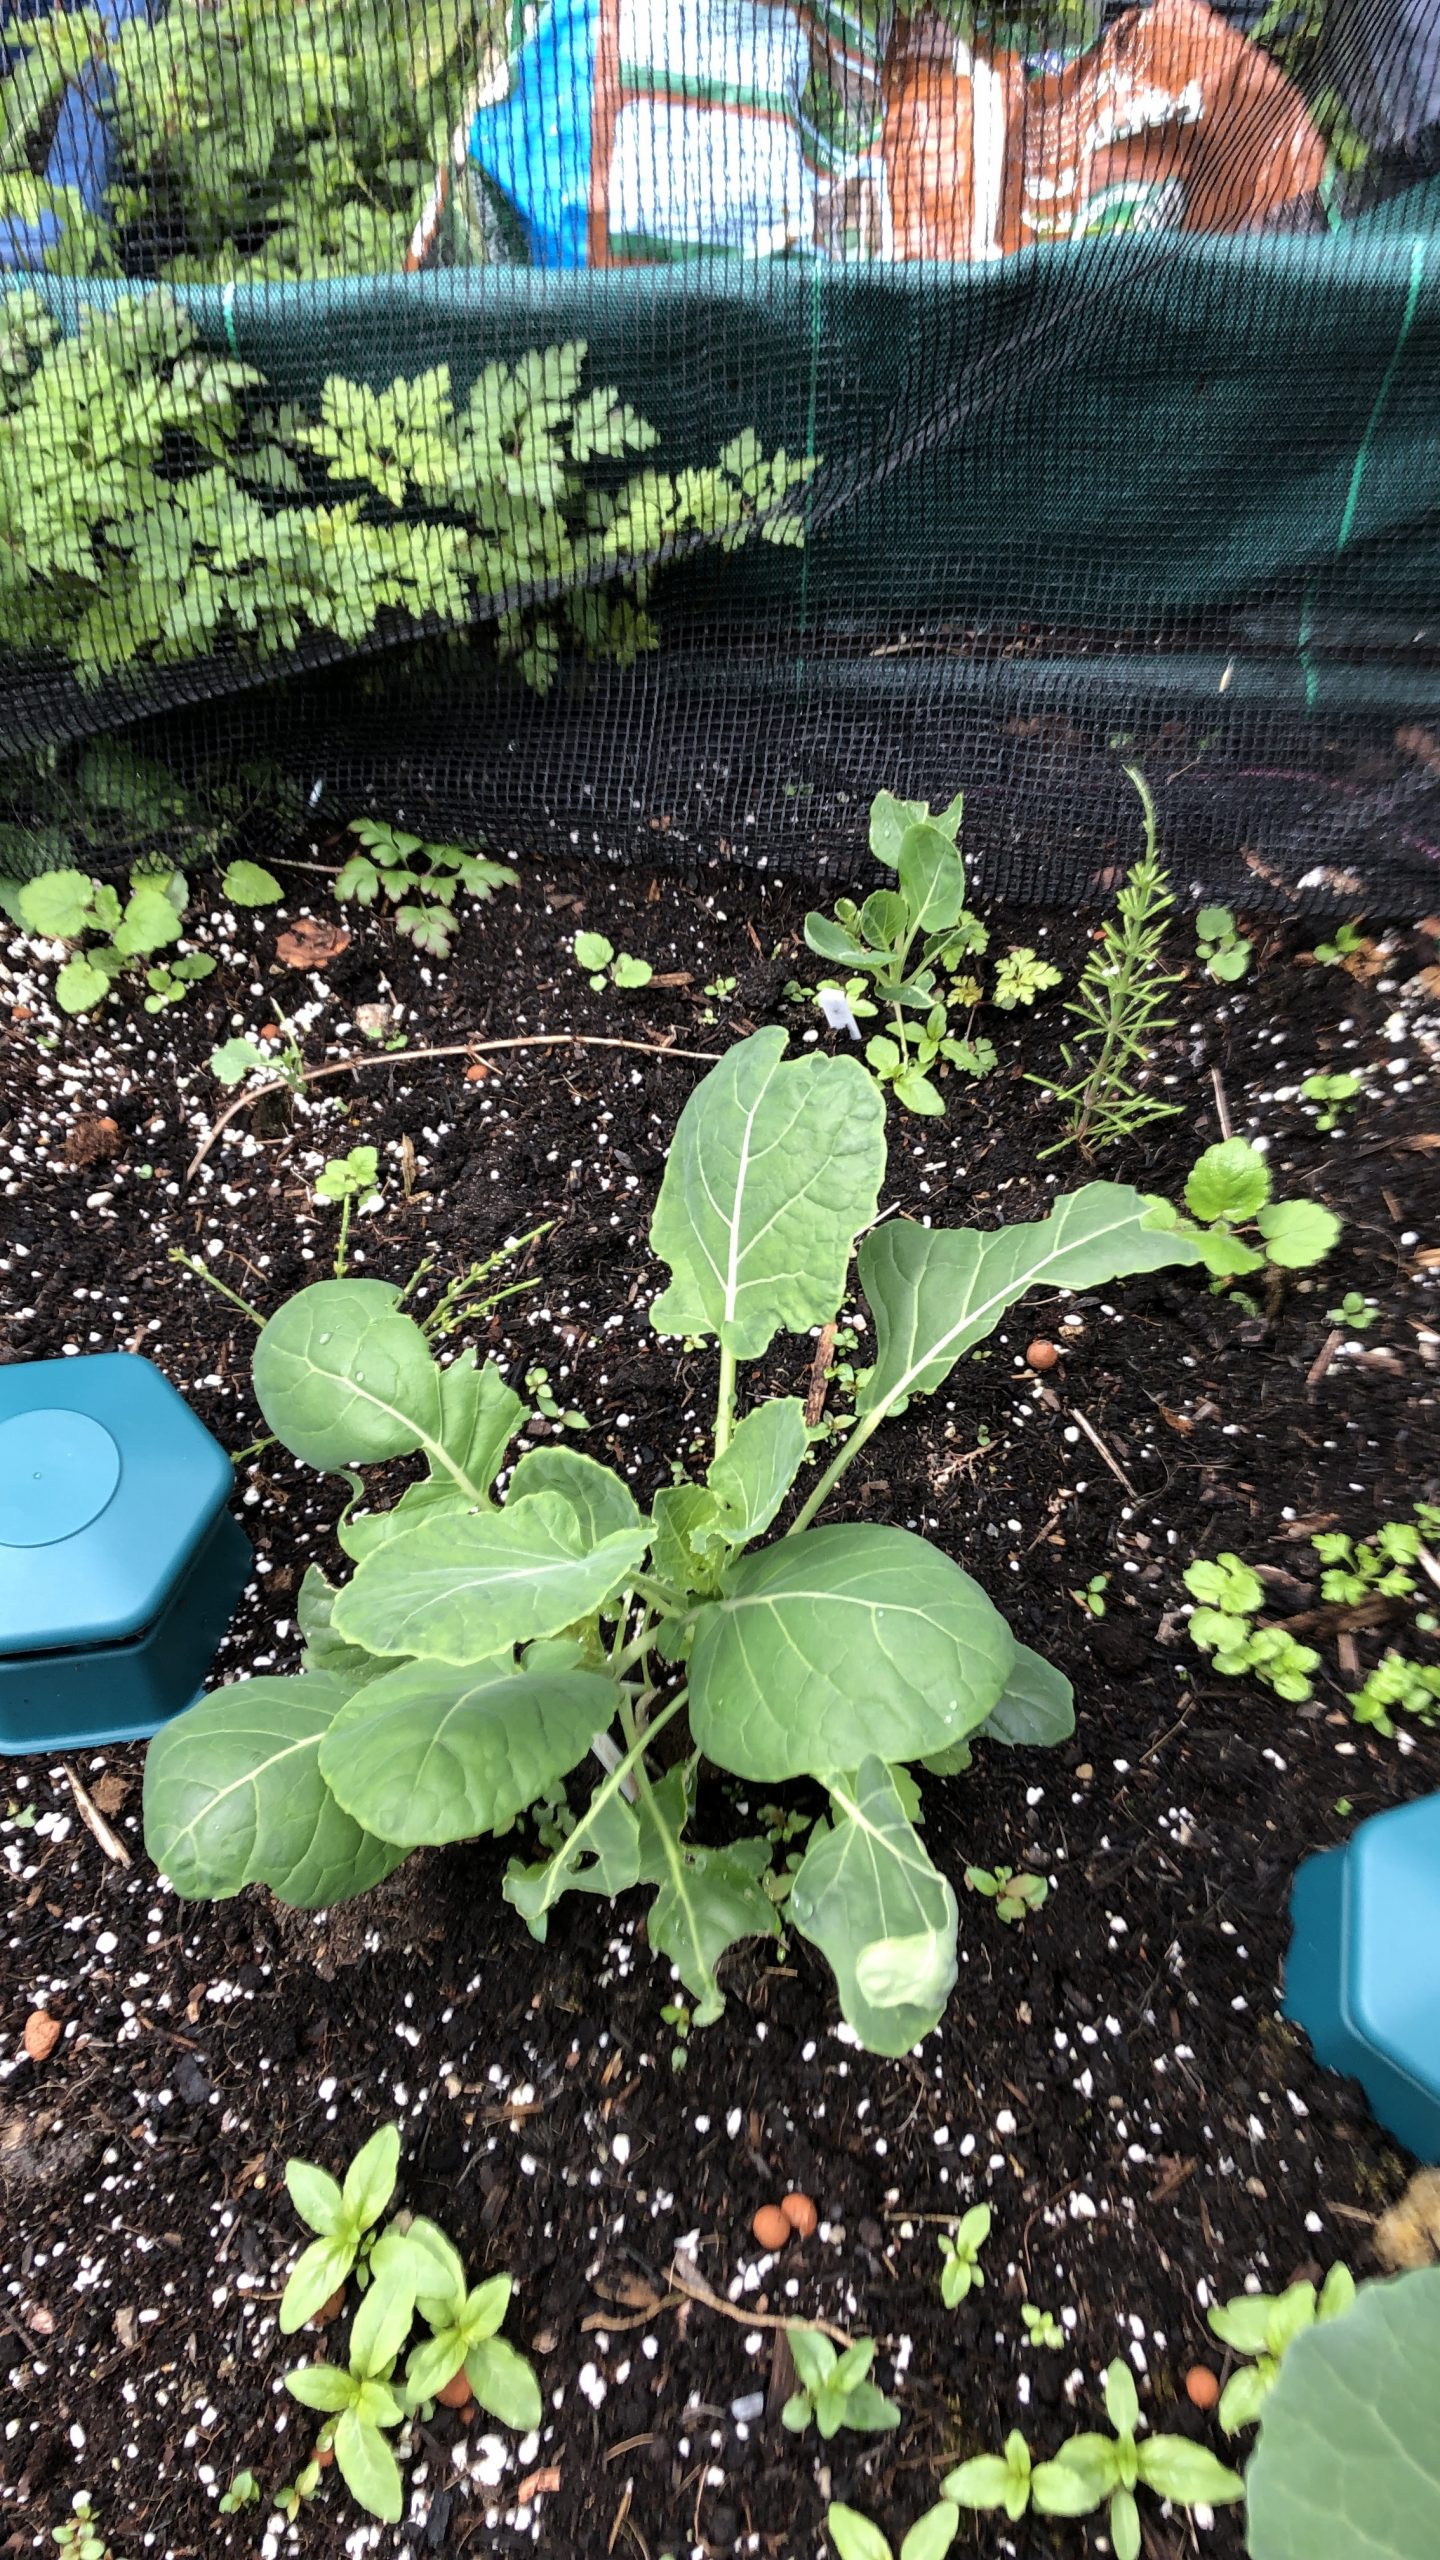 Brussel sprouts growing (26/6/21)